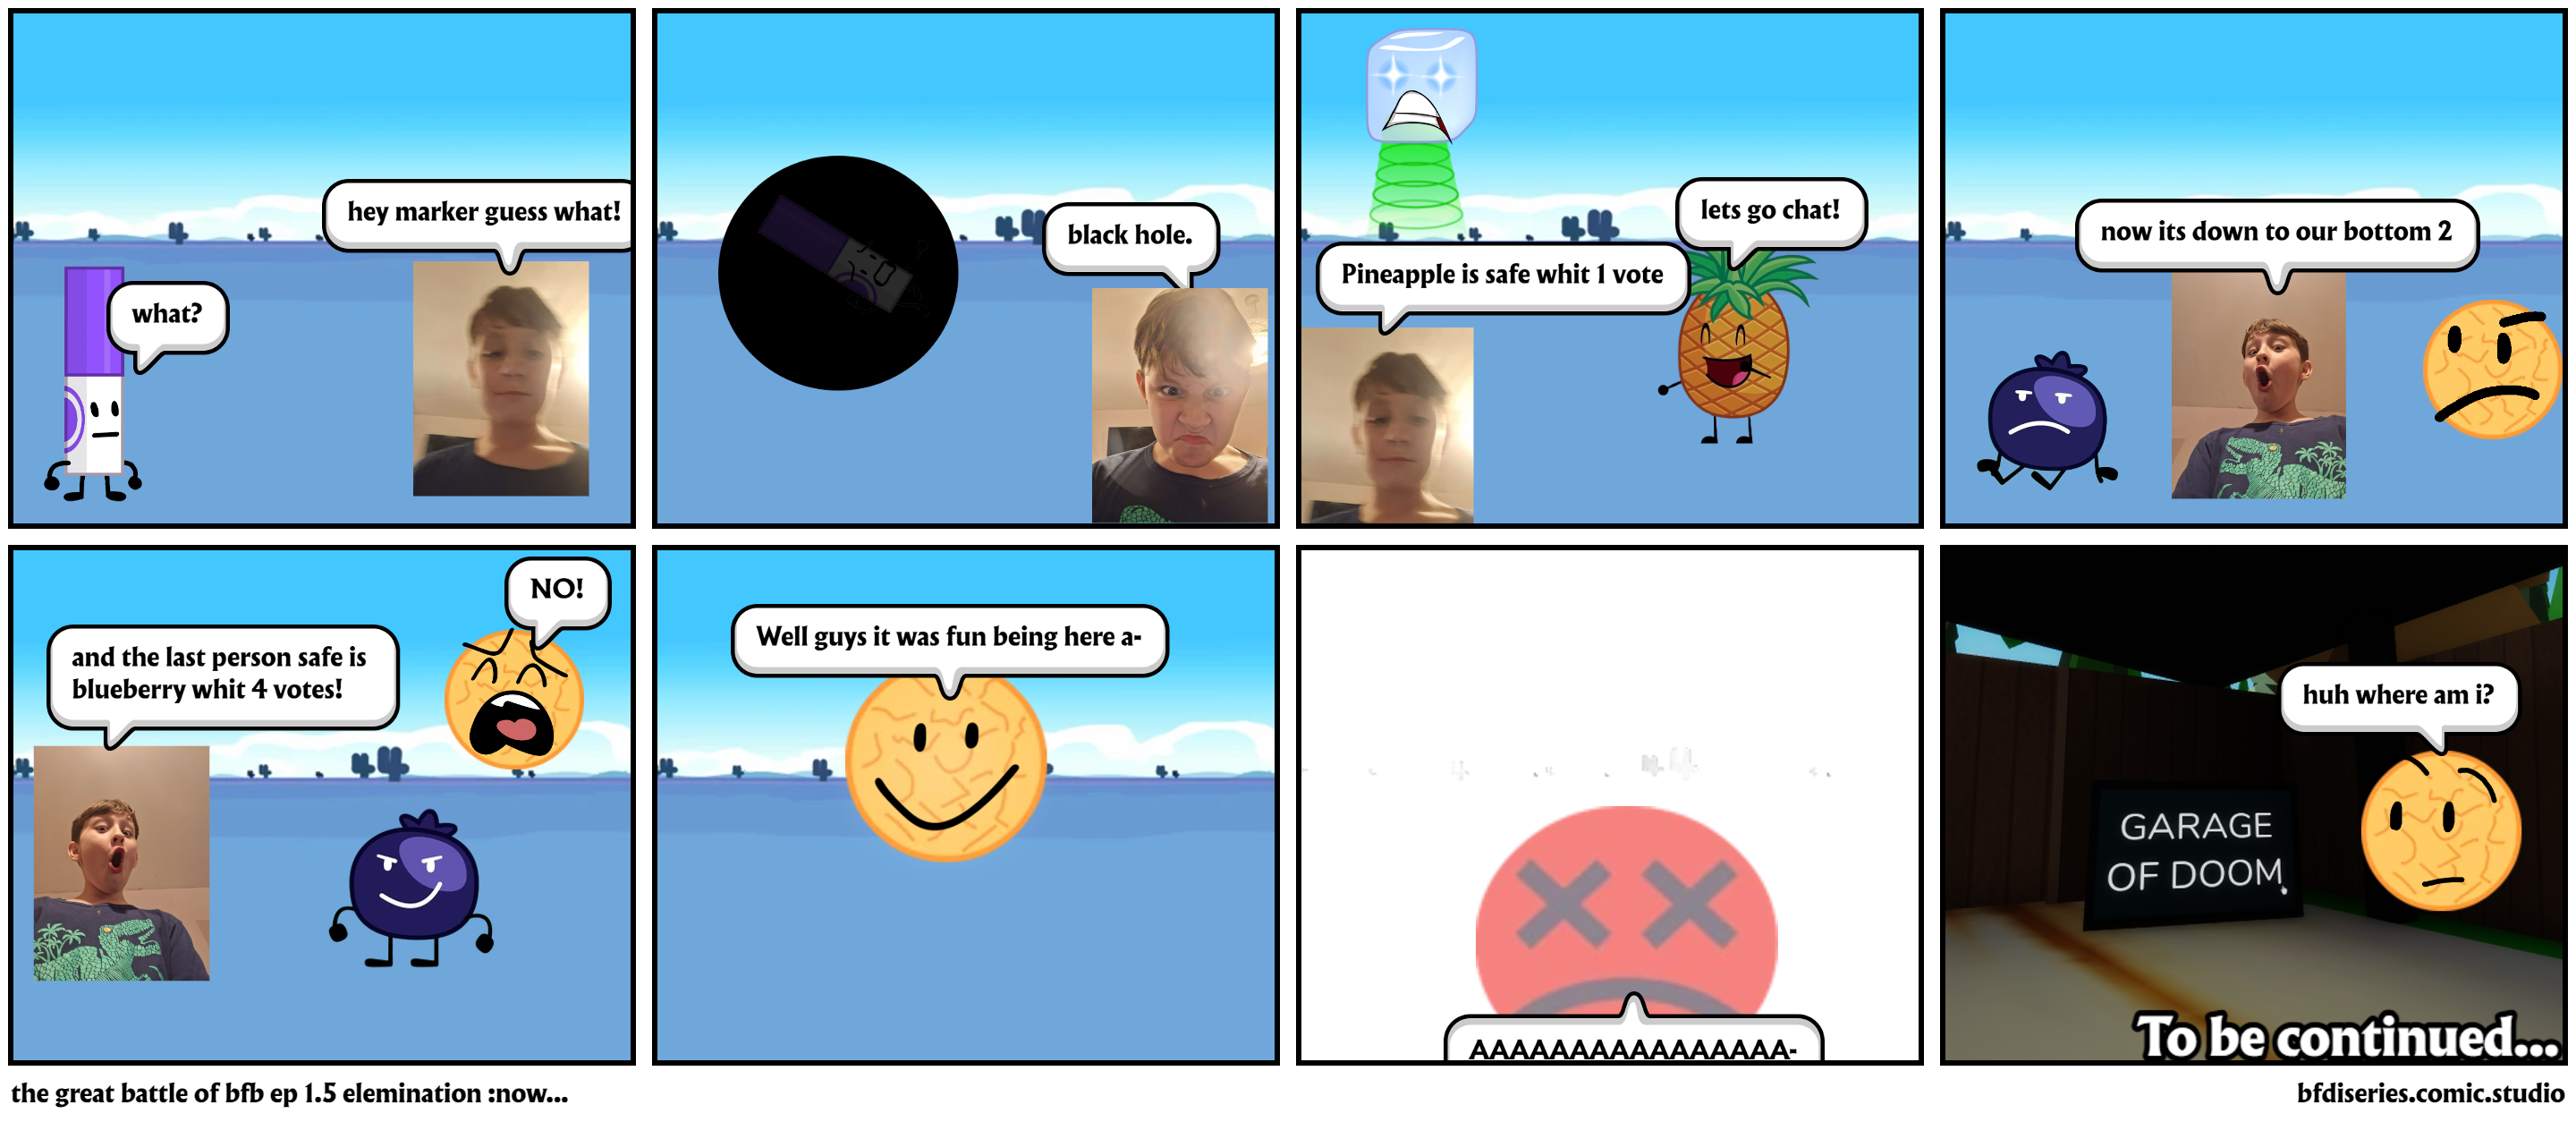 the great battle of bfb ep 1.5 elemination :now...